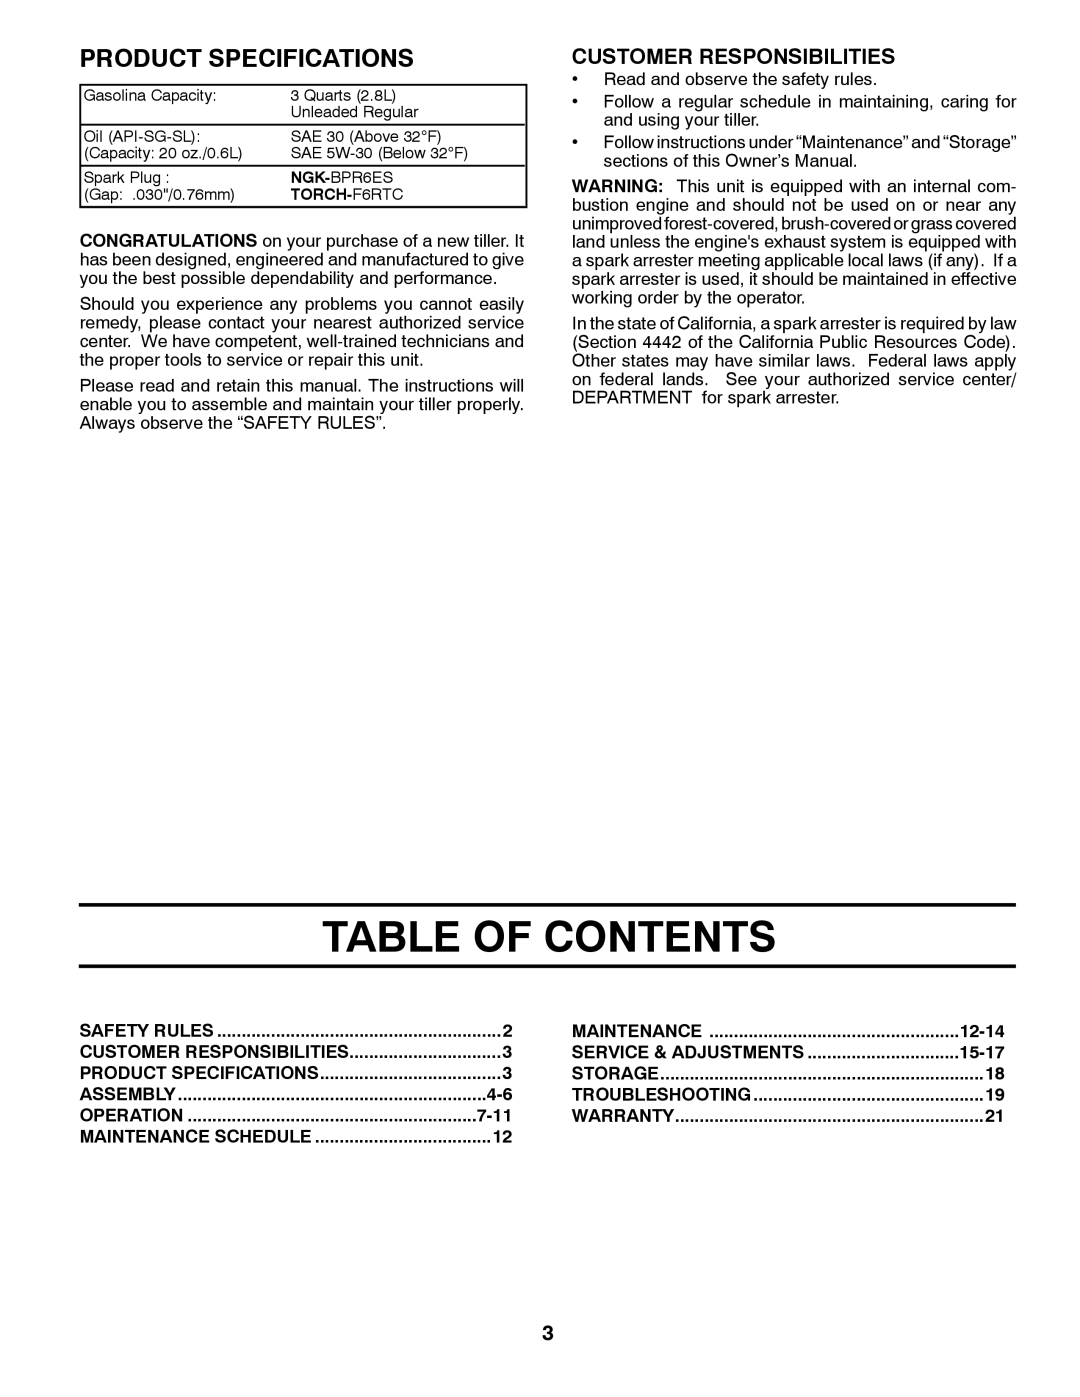 Poulan PRRT900 manual Table Of Contents, Product Specifications, Customer Responsibilities 